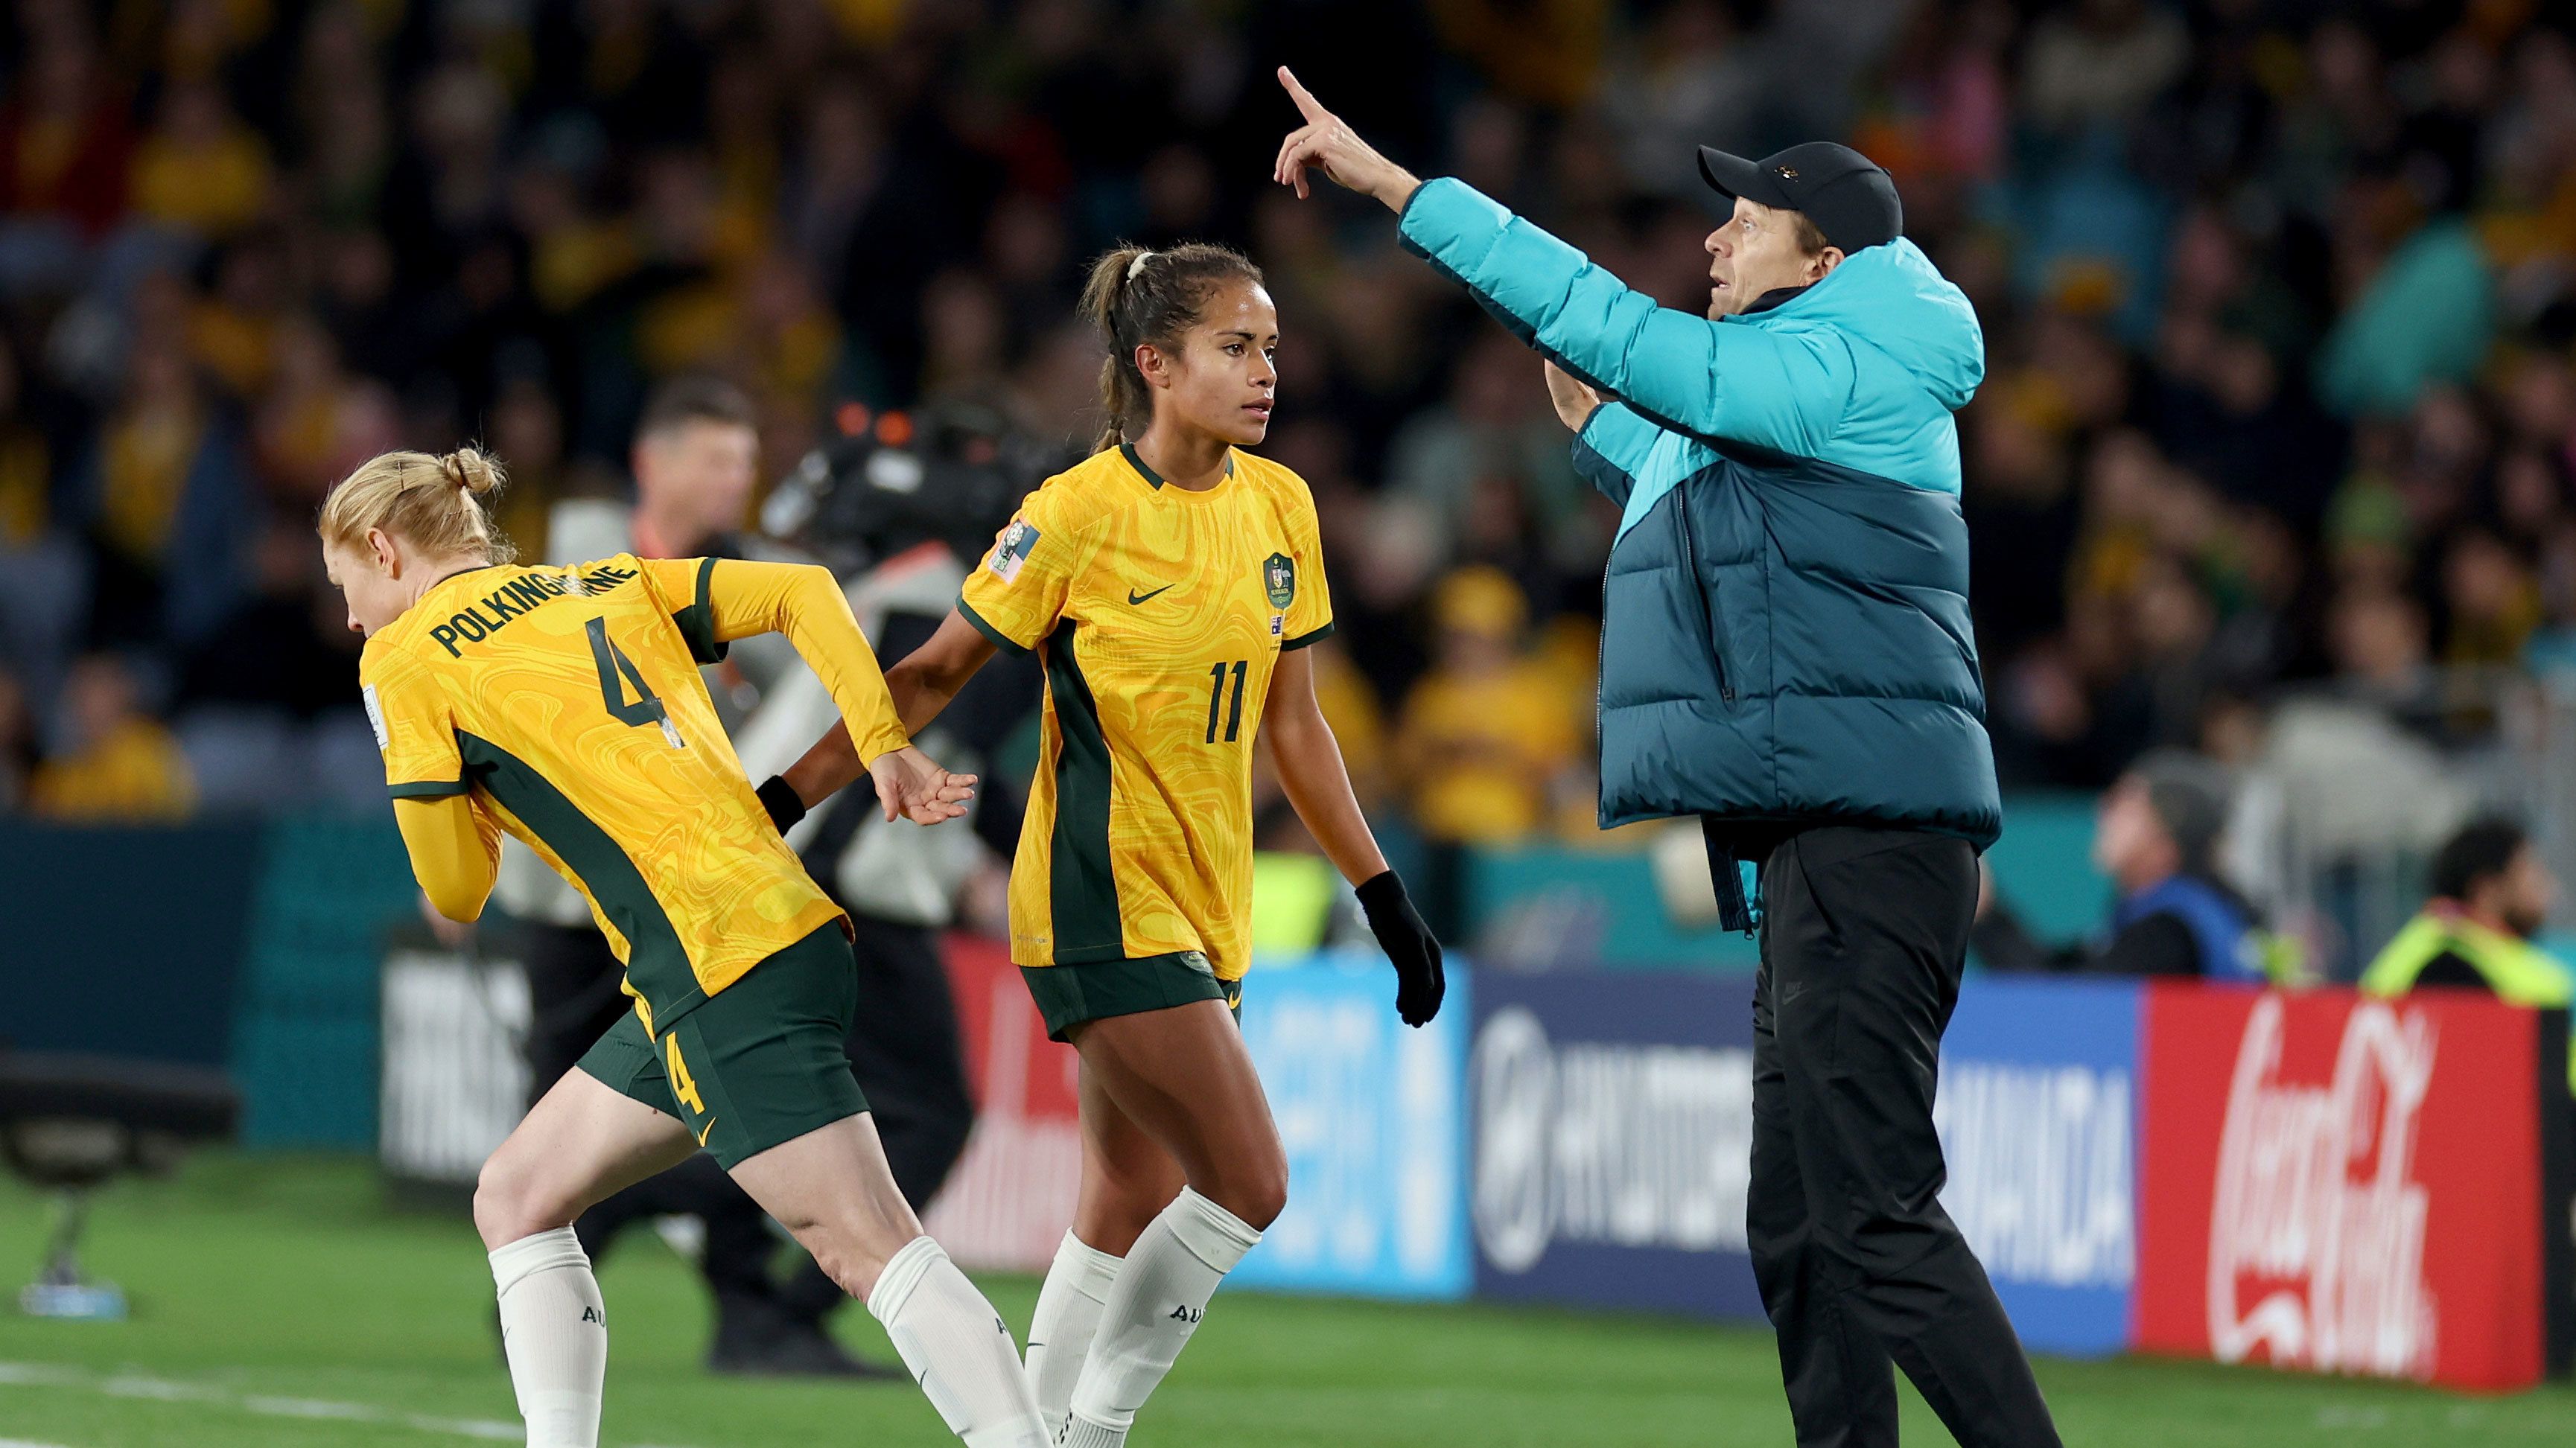 Clare Polkinghorne is brought on for Mary Fowler while Matildas coach Tony Gustavsson gives the team instructions during the second half of their clash with Ireland.